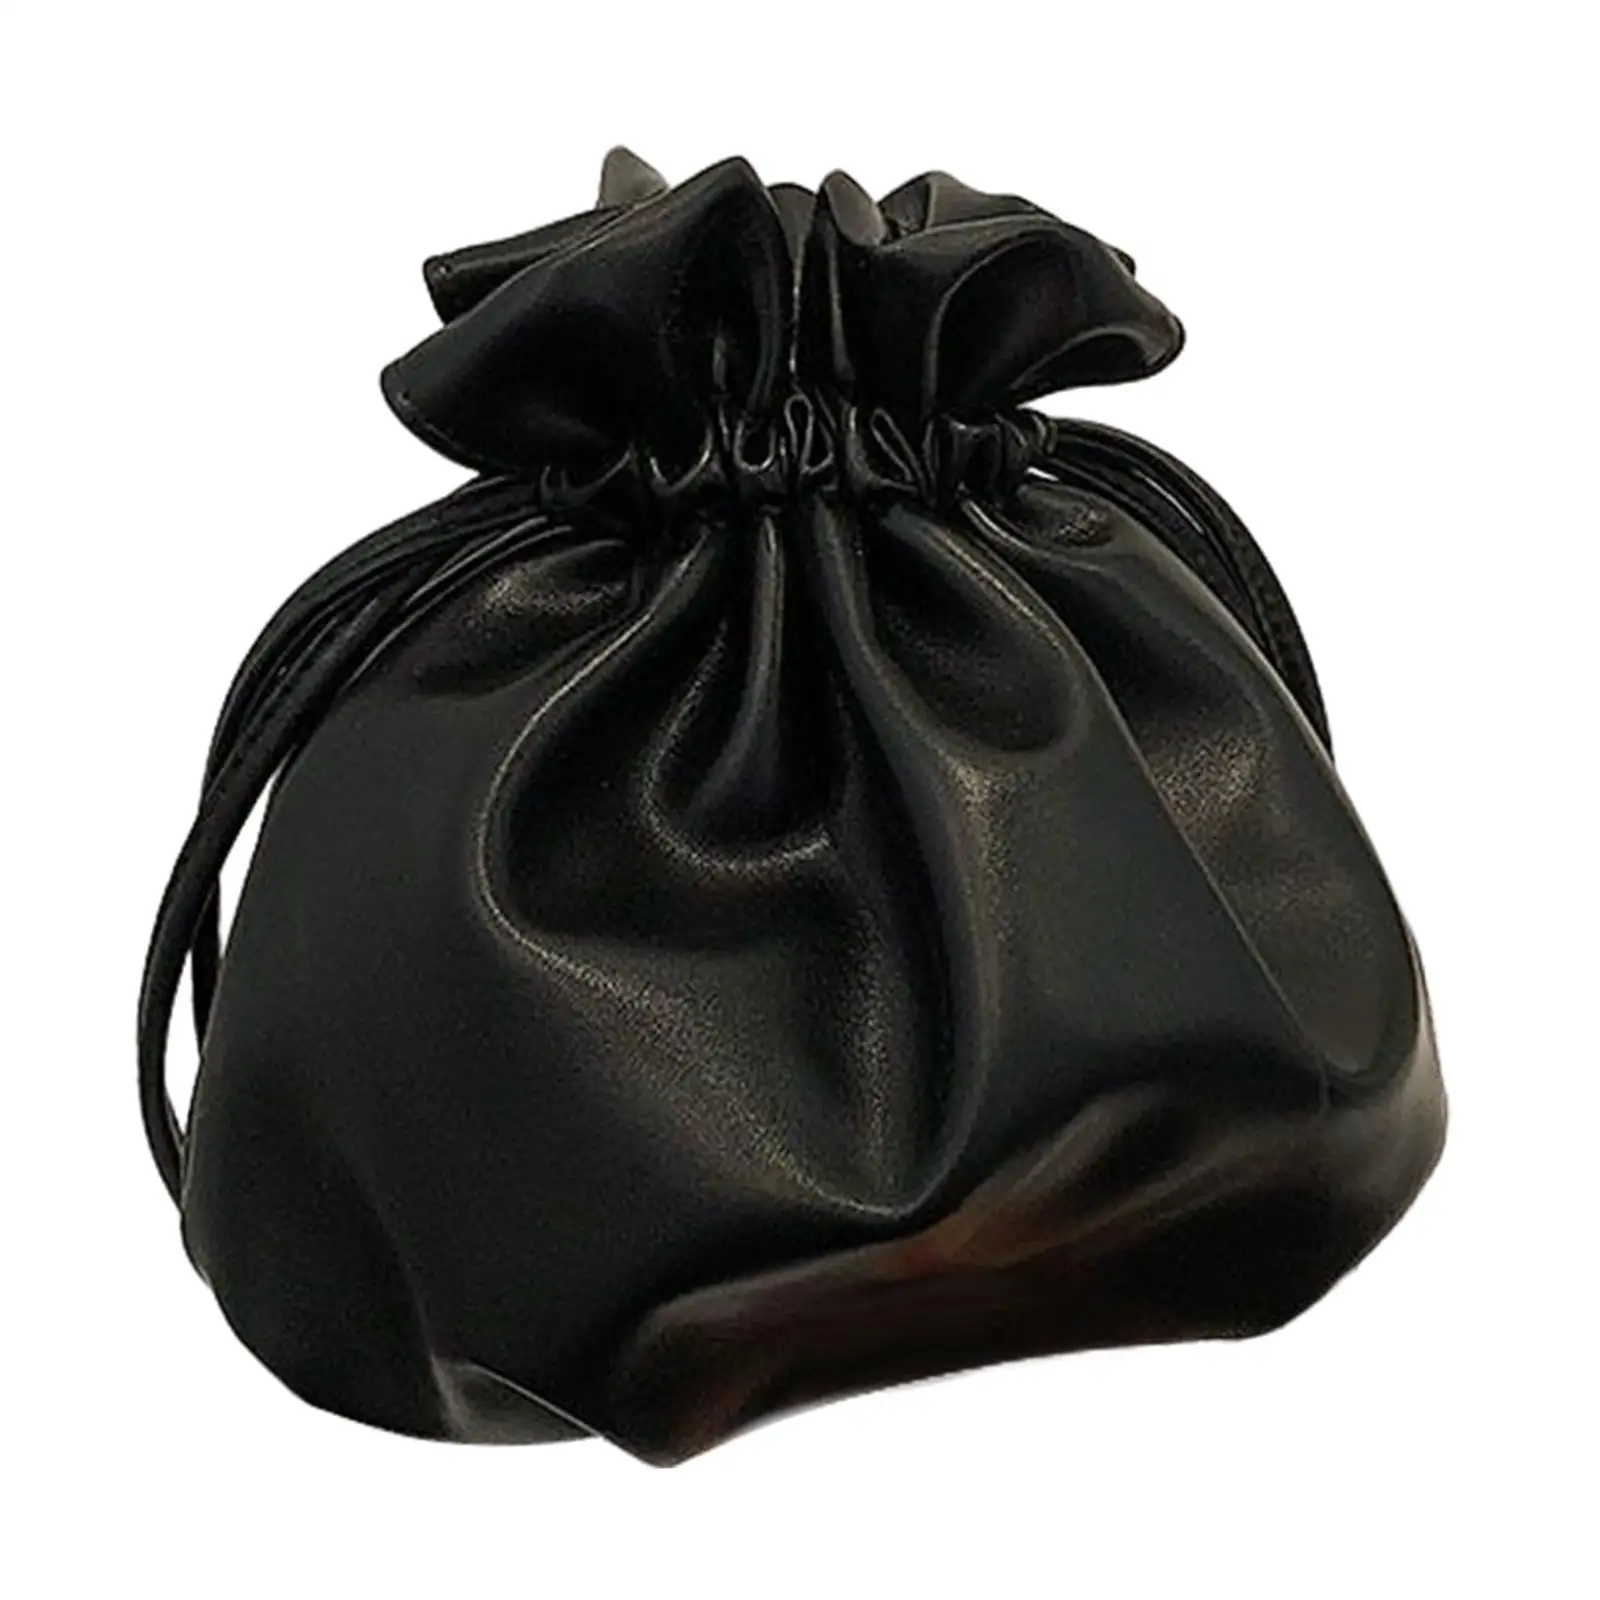 Drawstring Pouch Bucket Bags PU Leather Waterproof for Keys Coins Women